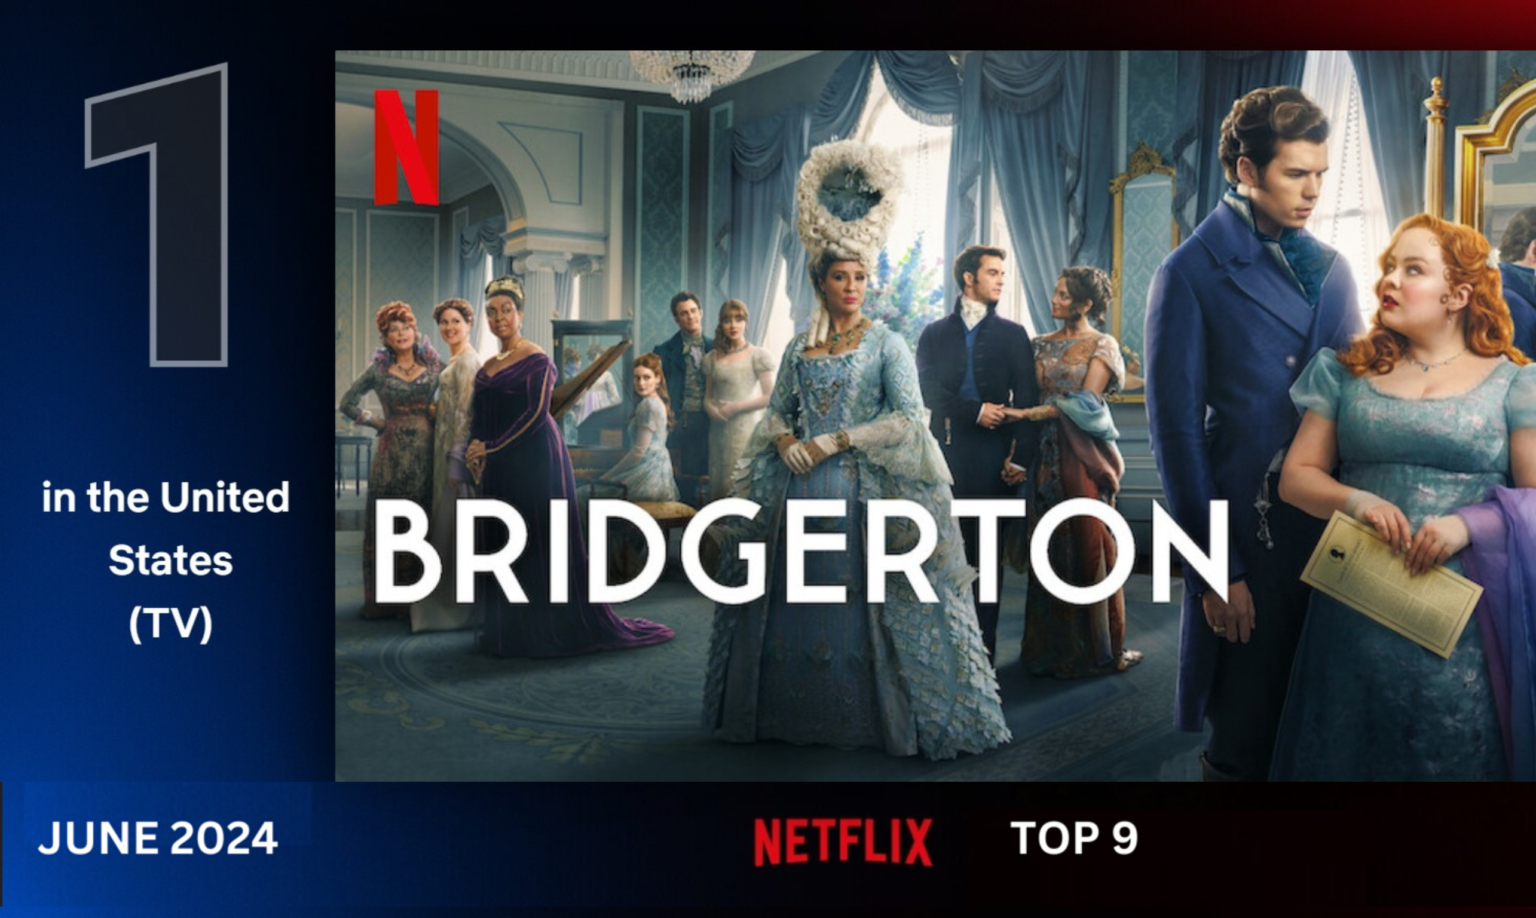 Top-9-Most-Popular-TV-Shows-on-Netflix-in-United-State-Thumbnail-Image-Cherry-streamers